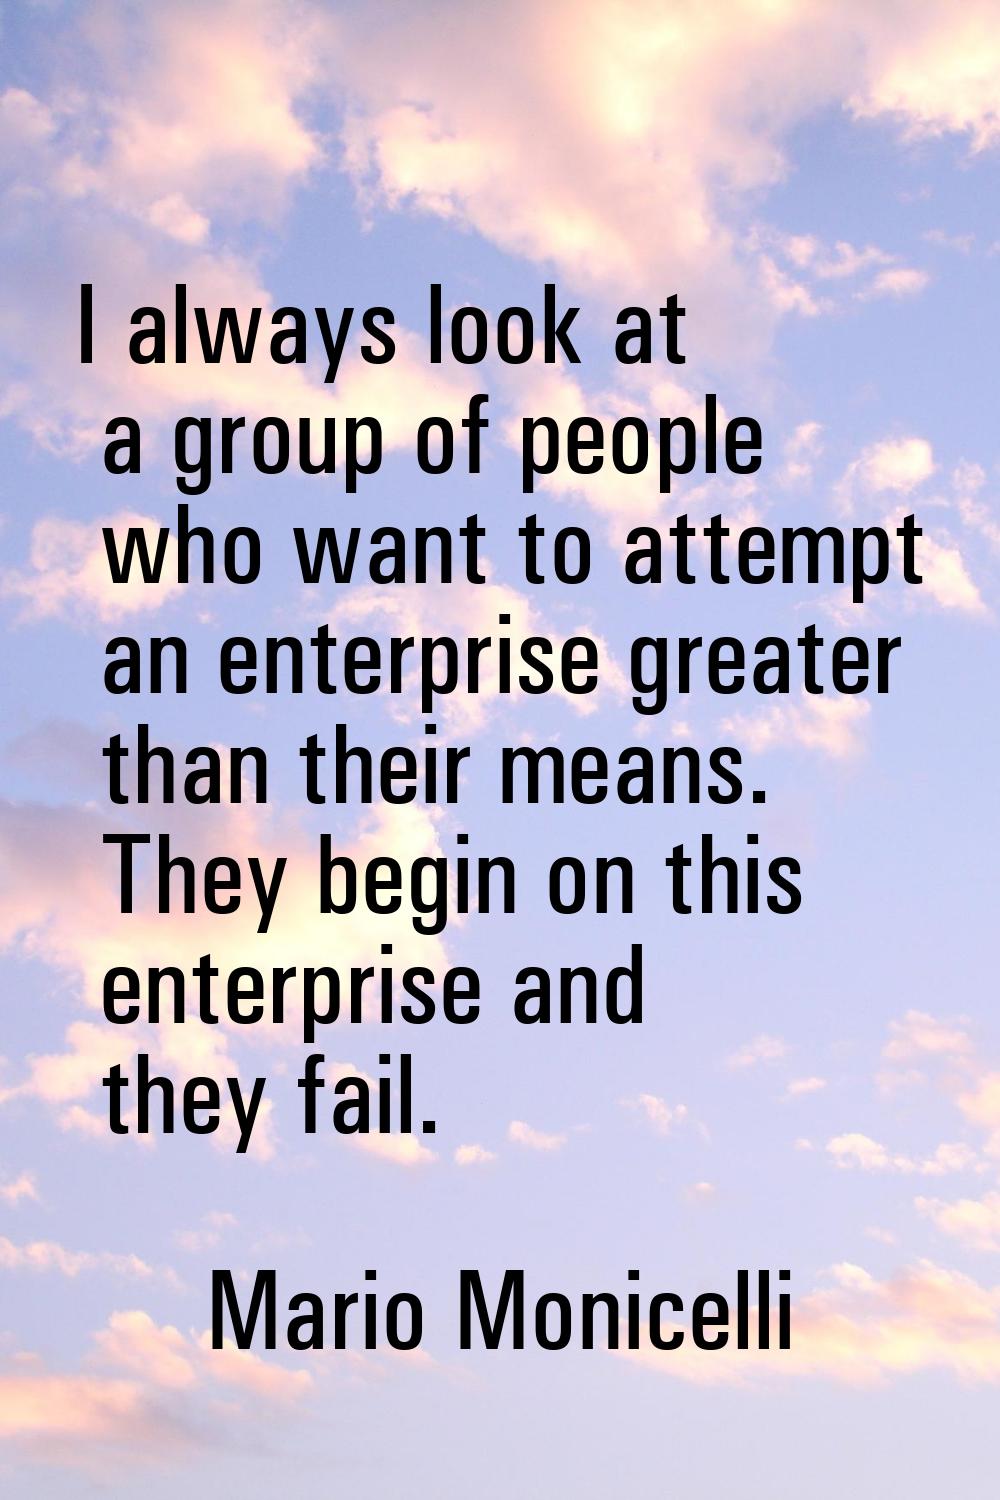 I always look at a group of people who want to attempt an enterprise greater than their means. They